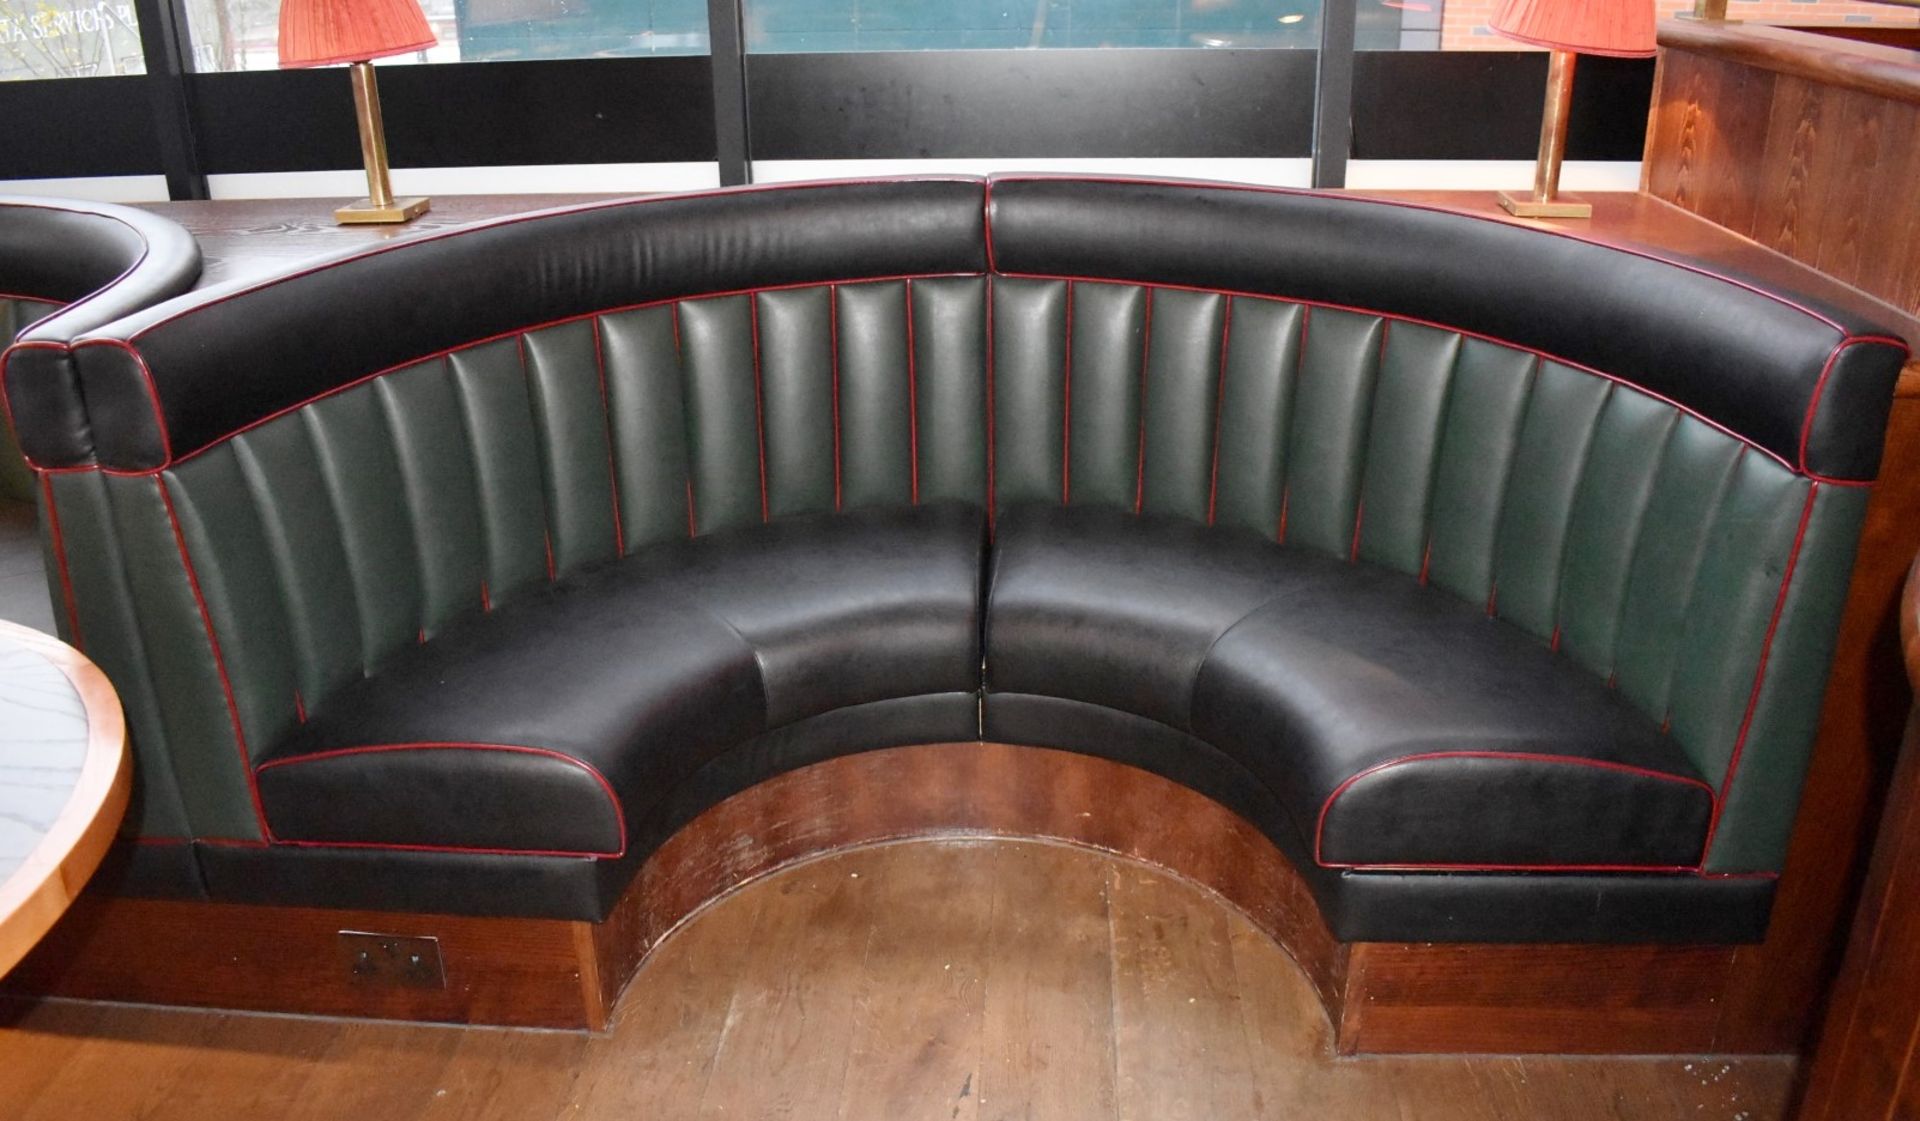 2 x Restaurant C-Shape 4 Person Seating Booth - Green and Black Vertical Fluted Back Upholstery - Image 13 of 13